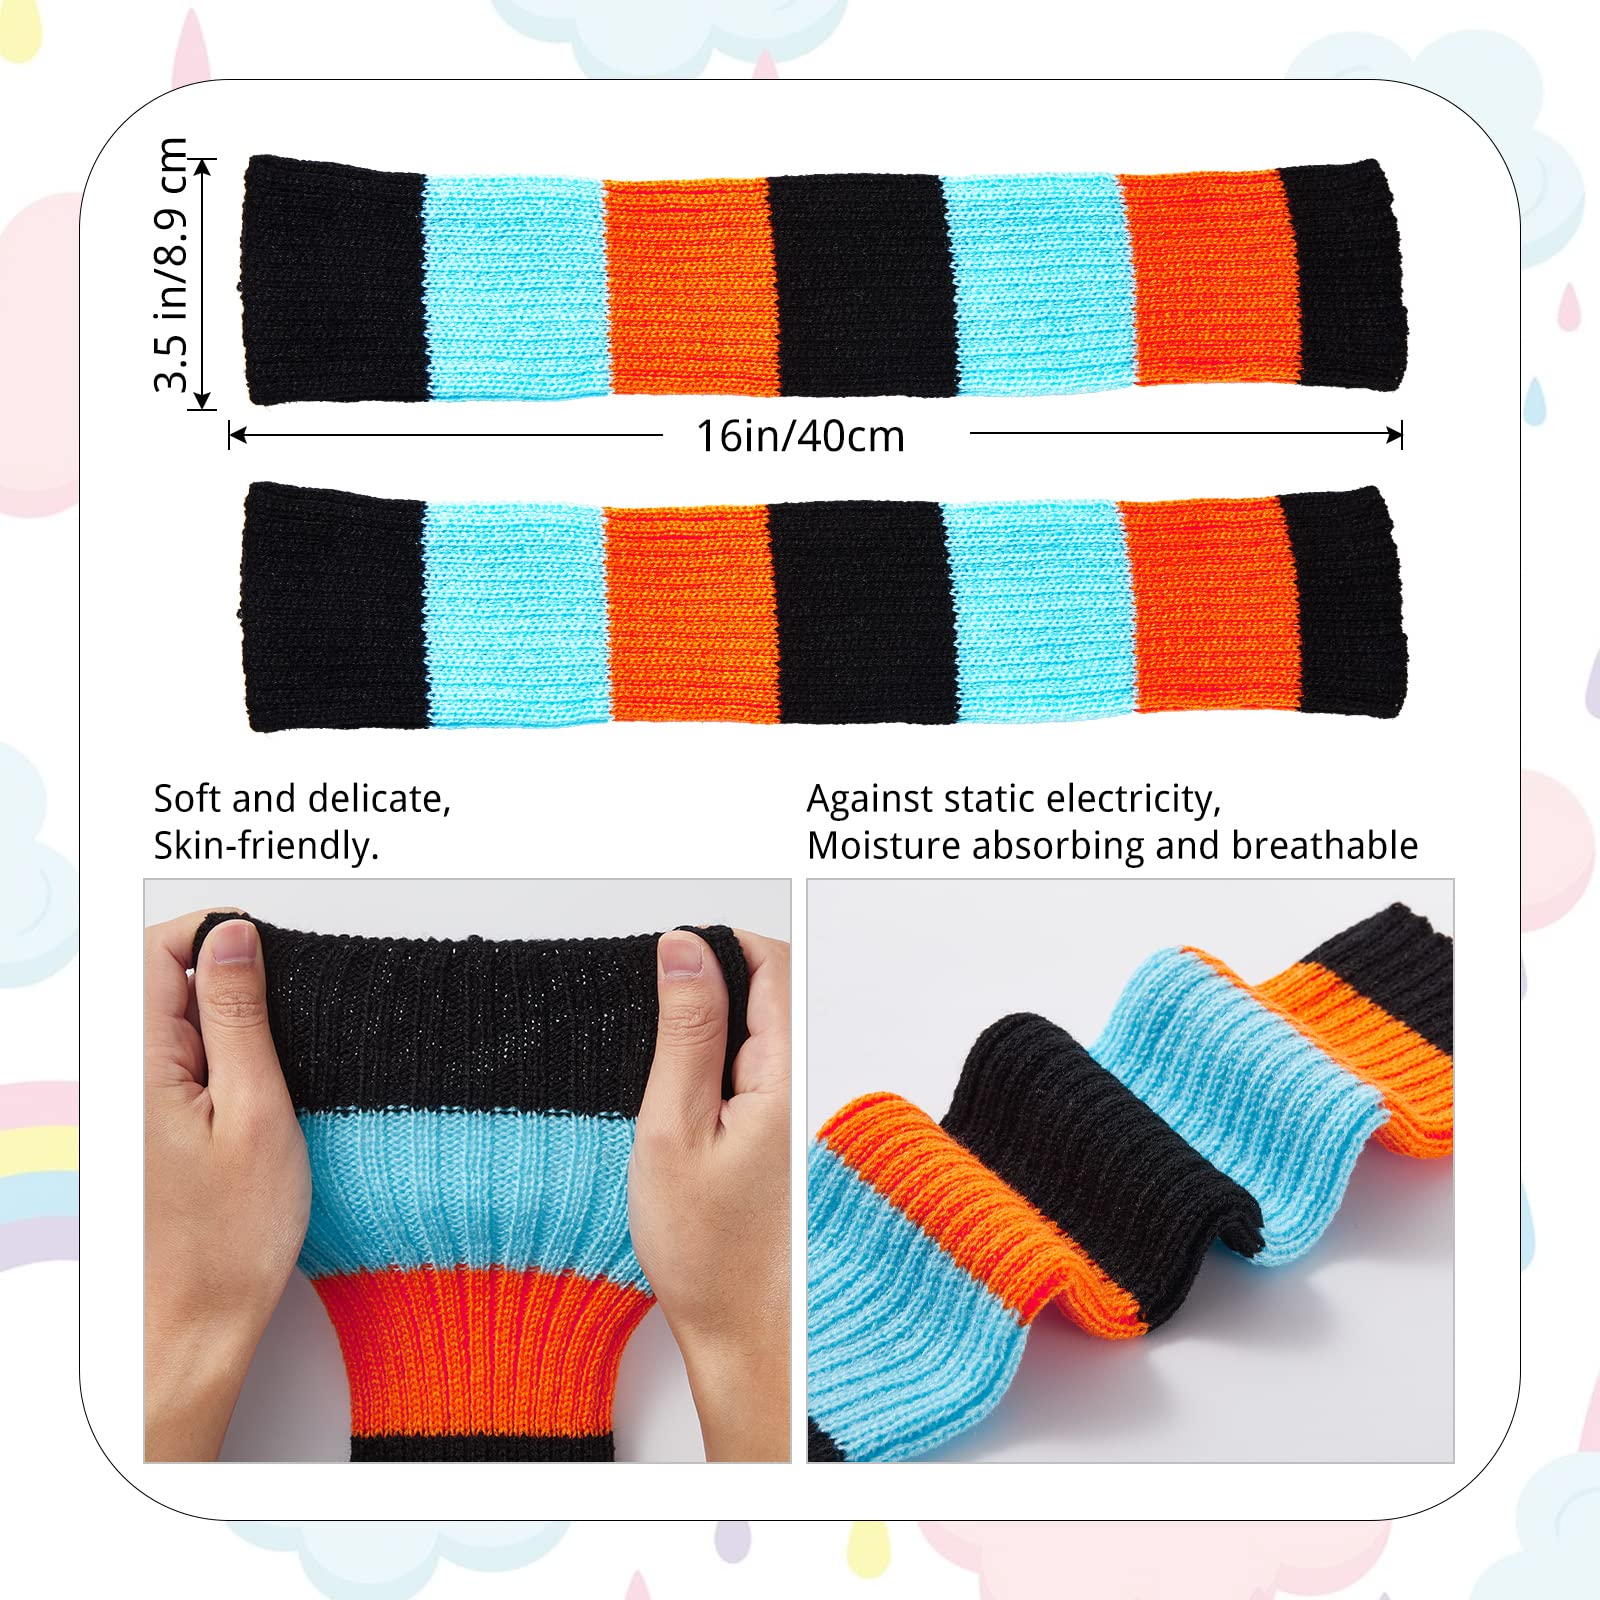 Womens Leg Warmers Neon Knitted for 80s Party Sports Yoga-Black & Blue & Bright Orange - Moon Wood